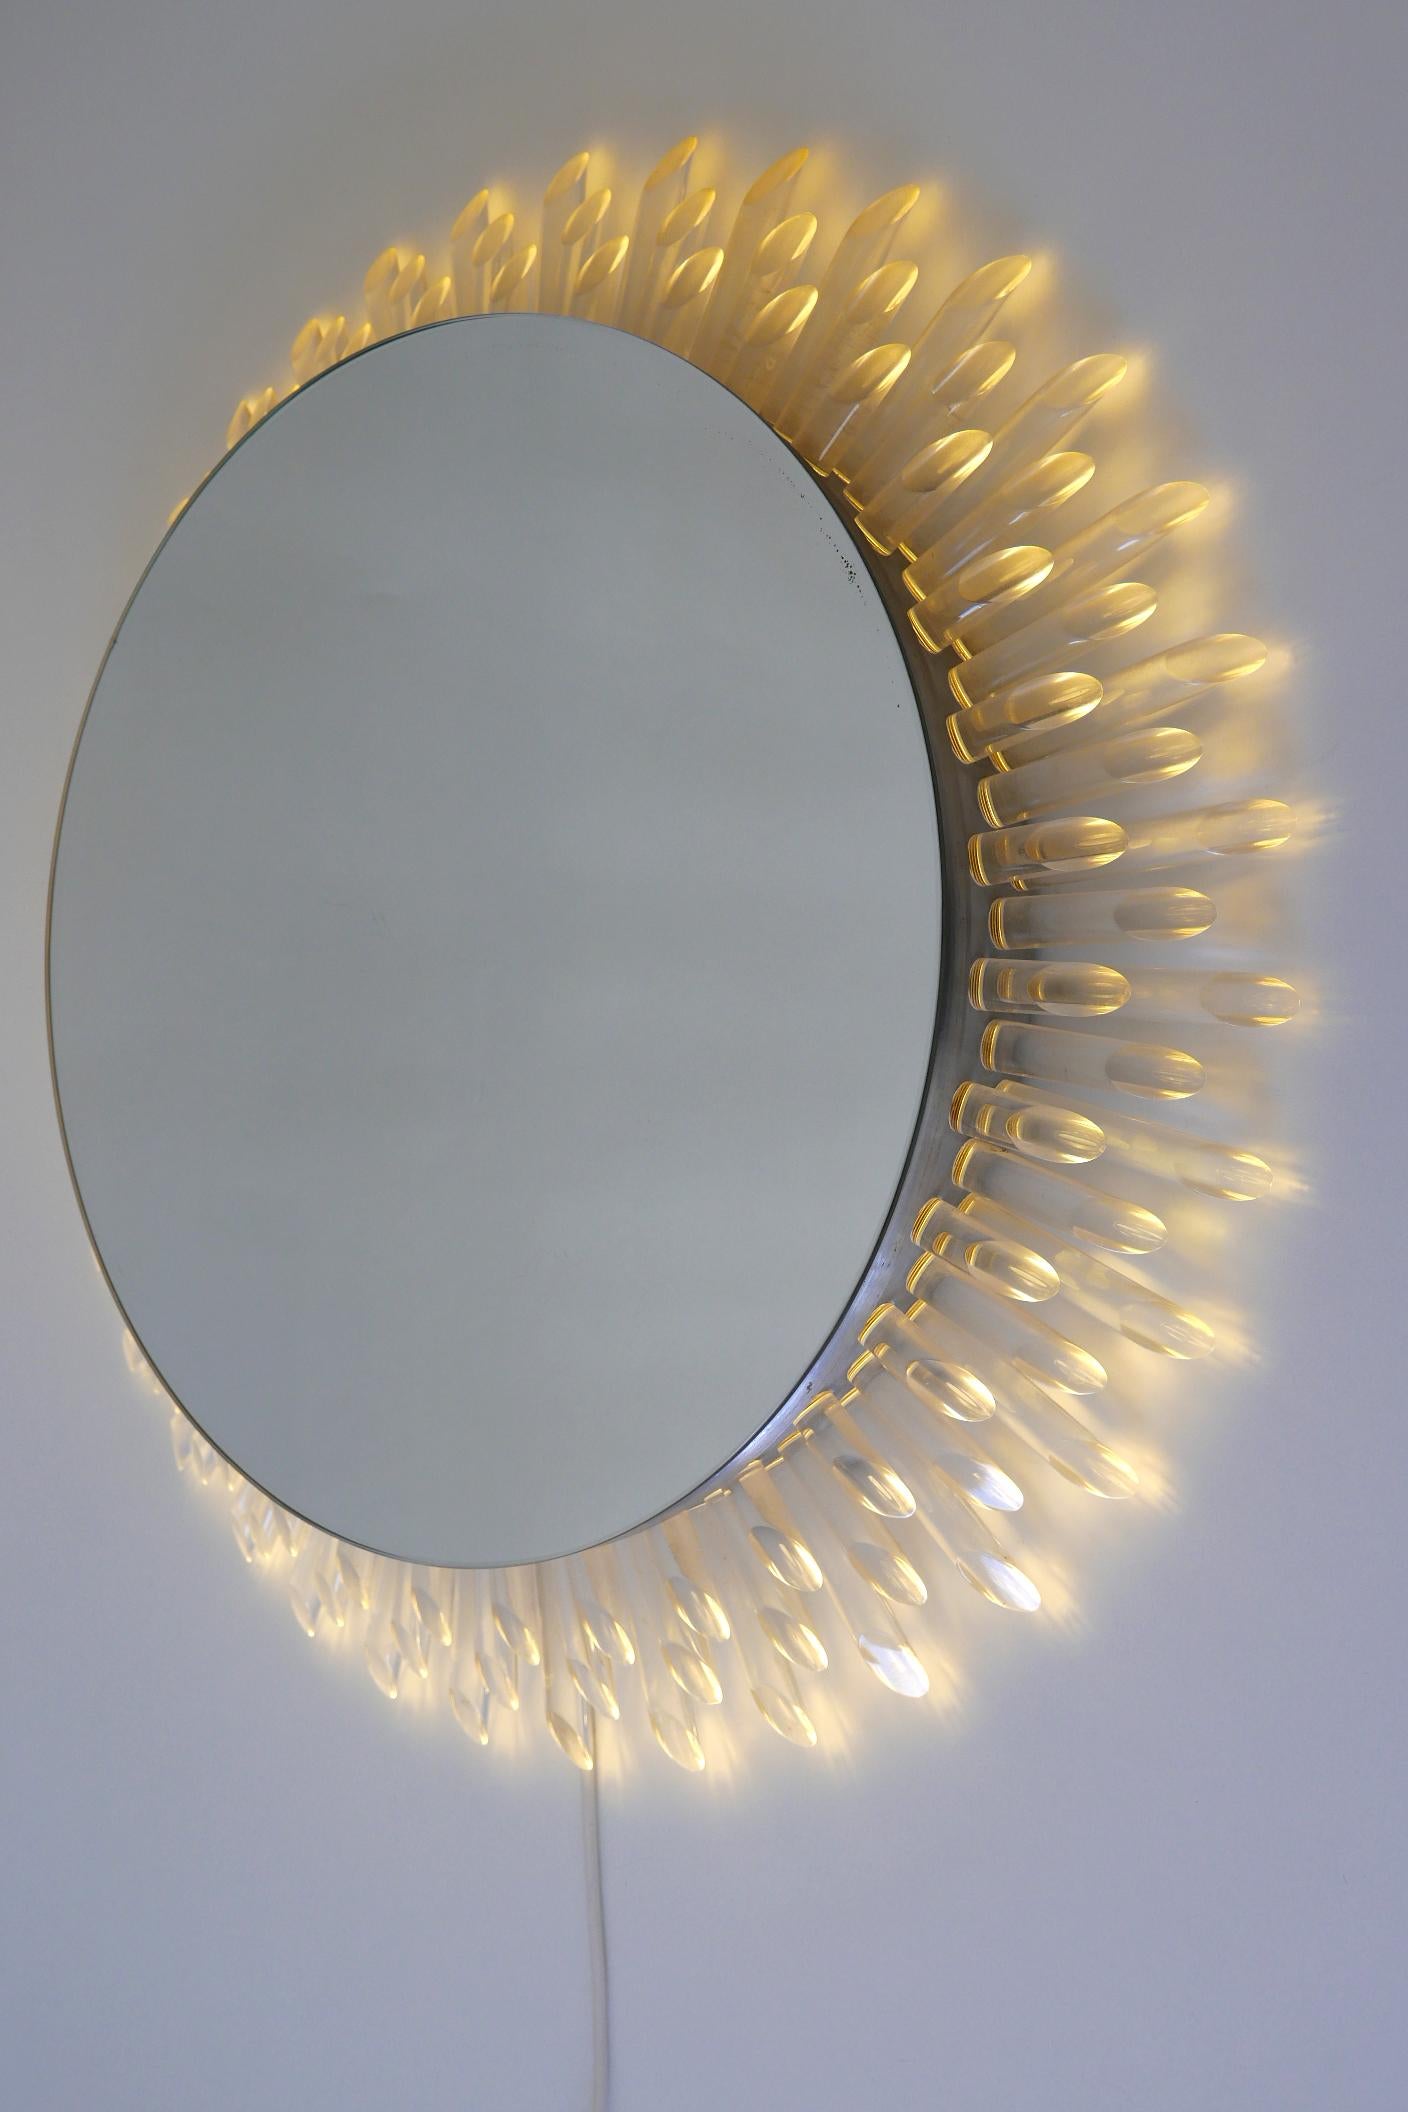 Spectacular Large Mid-Century Modern Backlit Sunburst Wall Mirror Germany 1970s For Sale 1